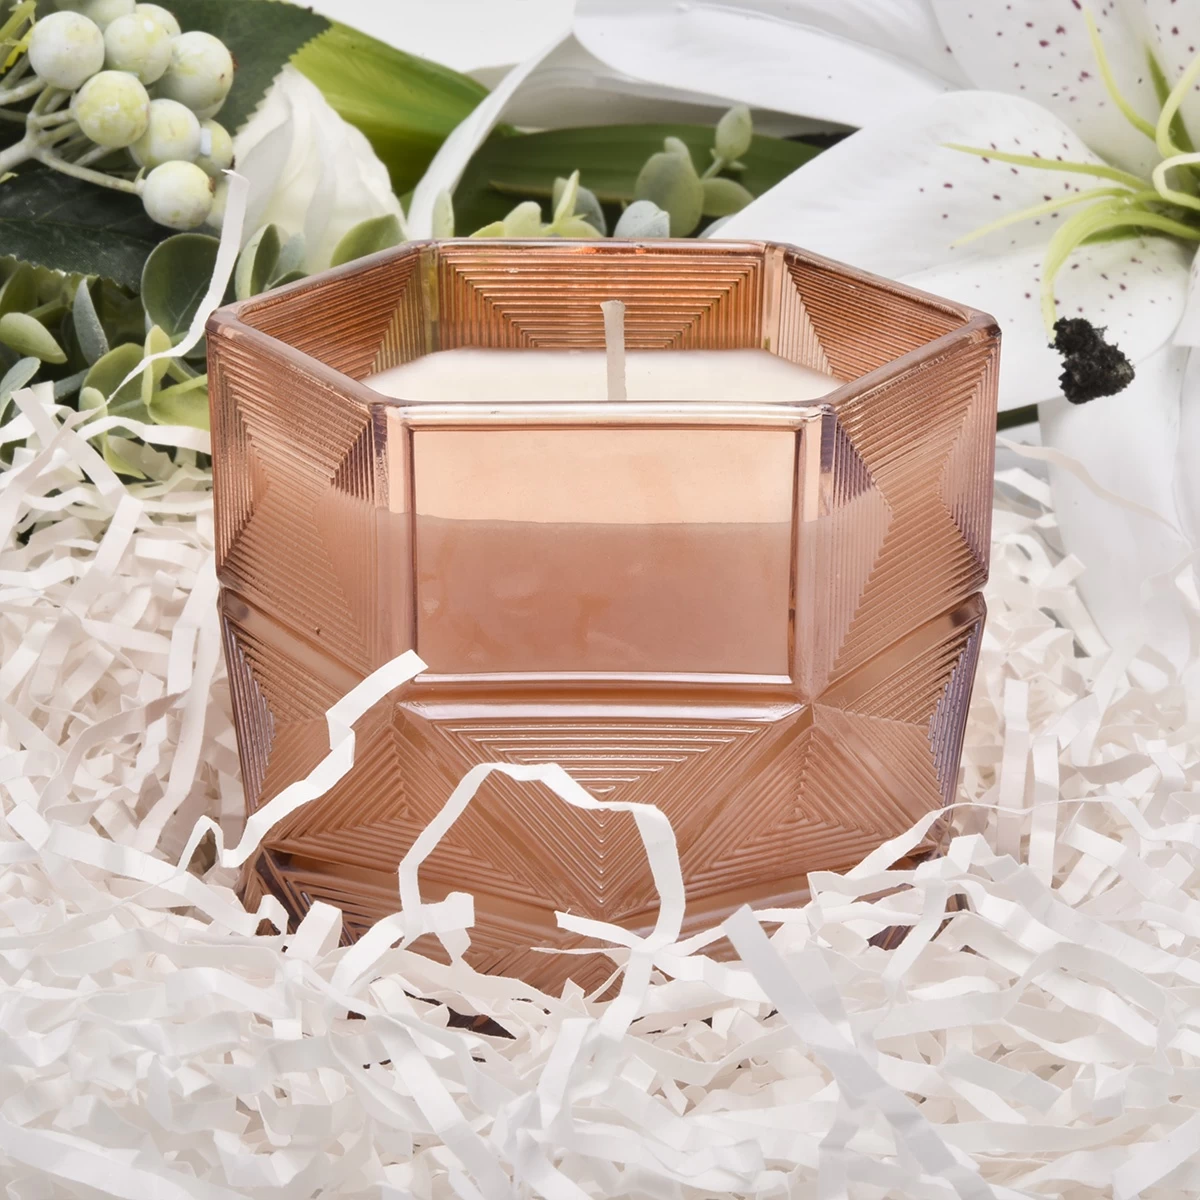 Luxury amber Hexagon decorative candle glass holder container